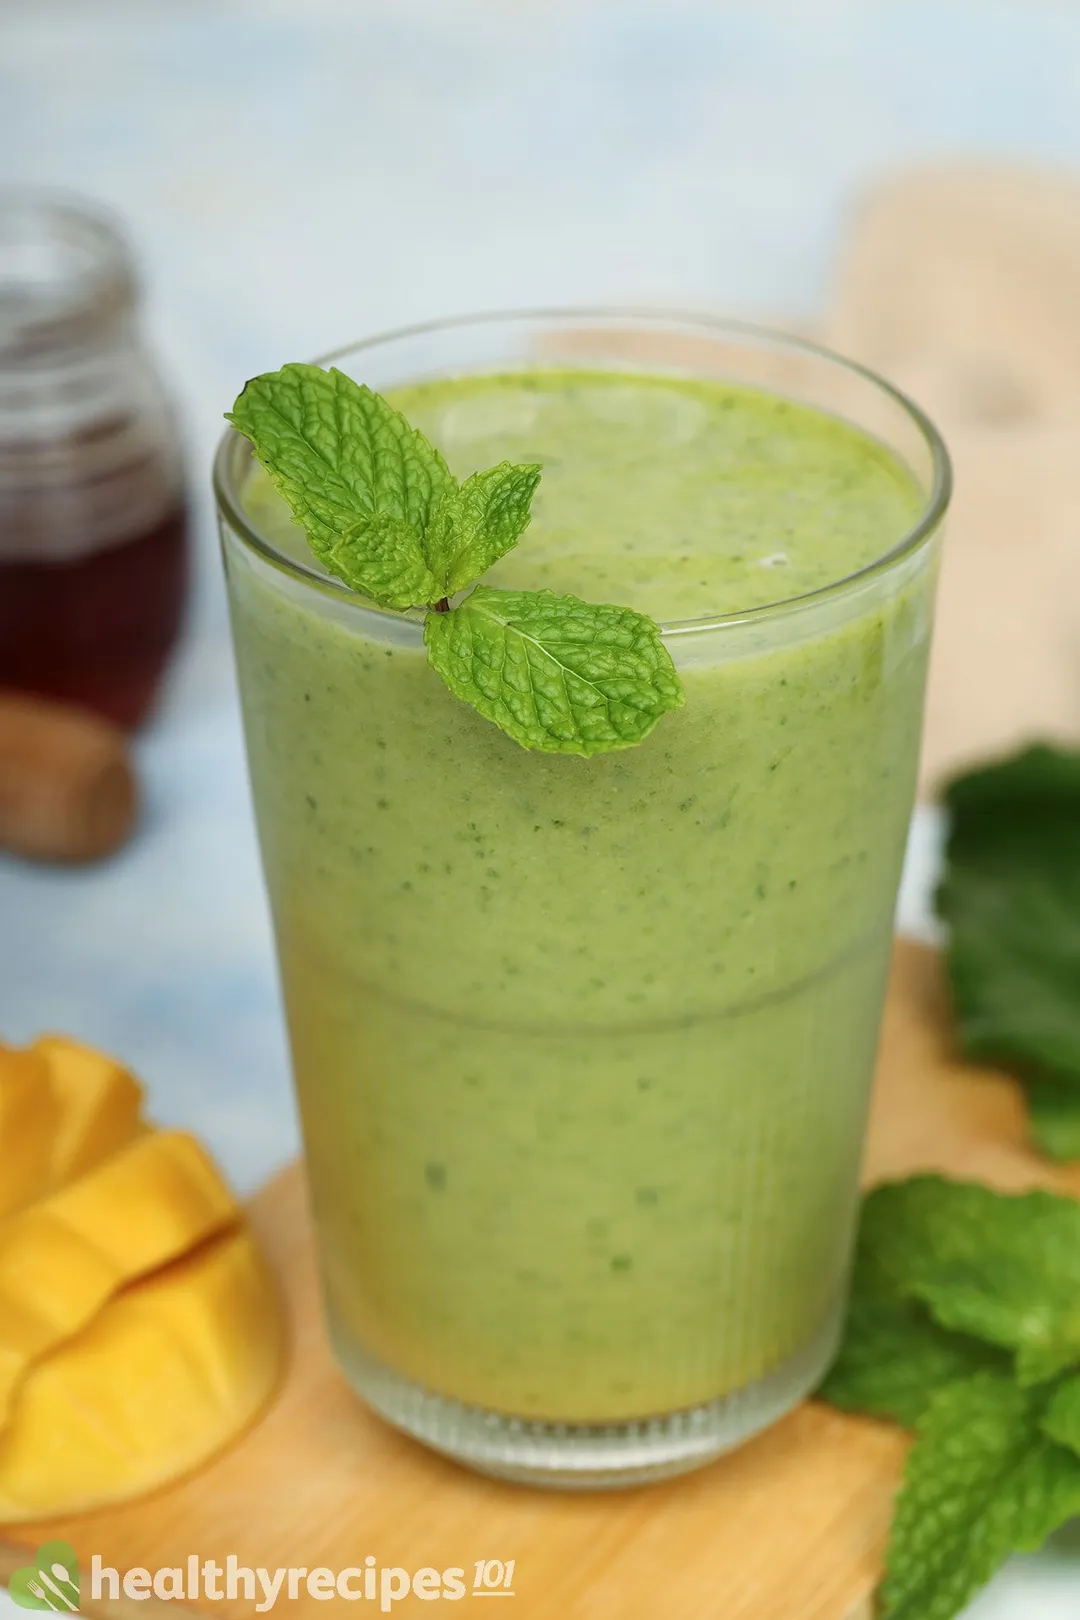 A glass of Mango Spinach Smoothie garnished with mint leaves and placed on a wooden board near a scored mango.